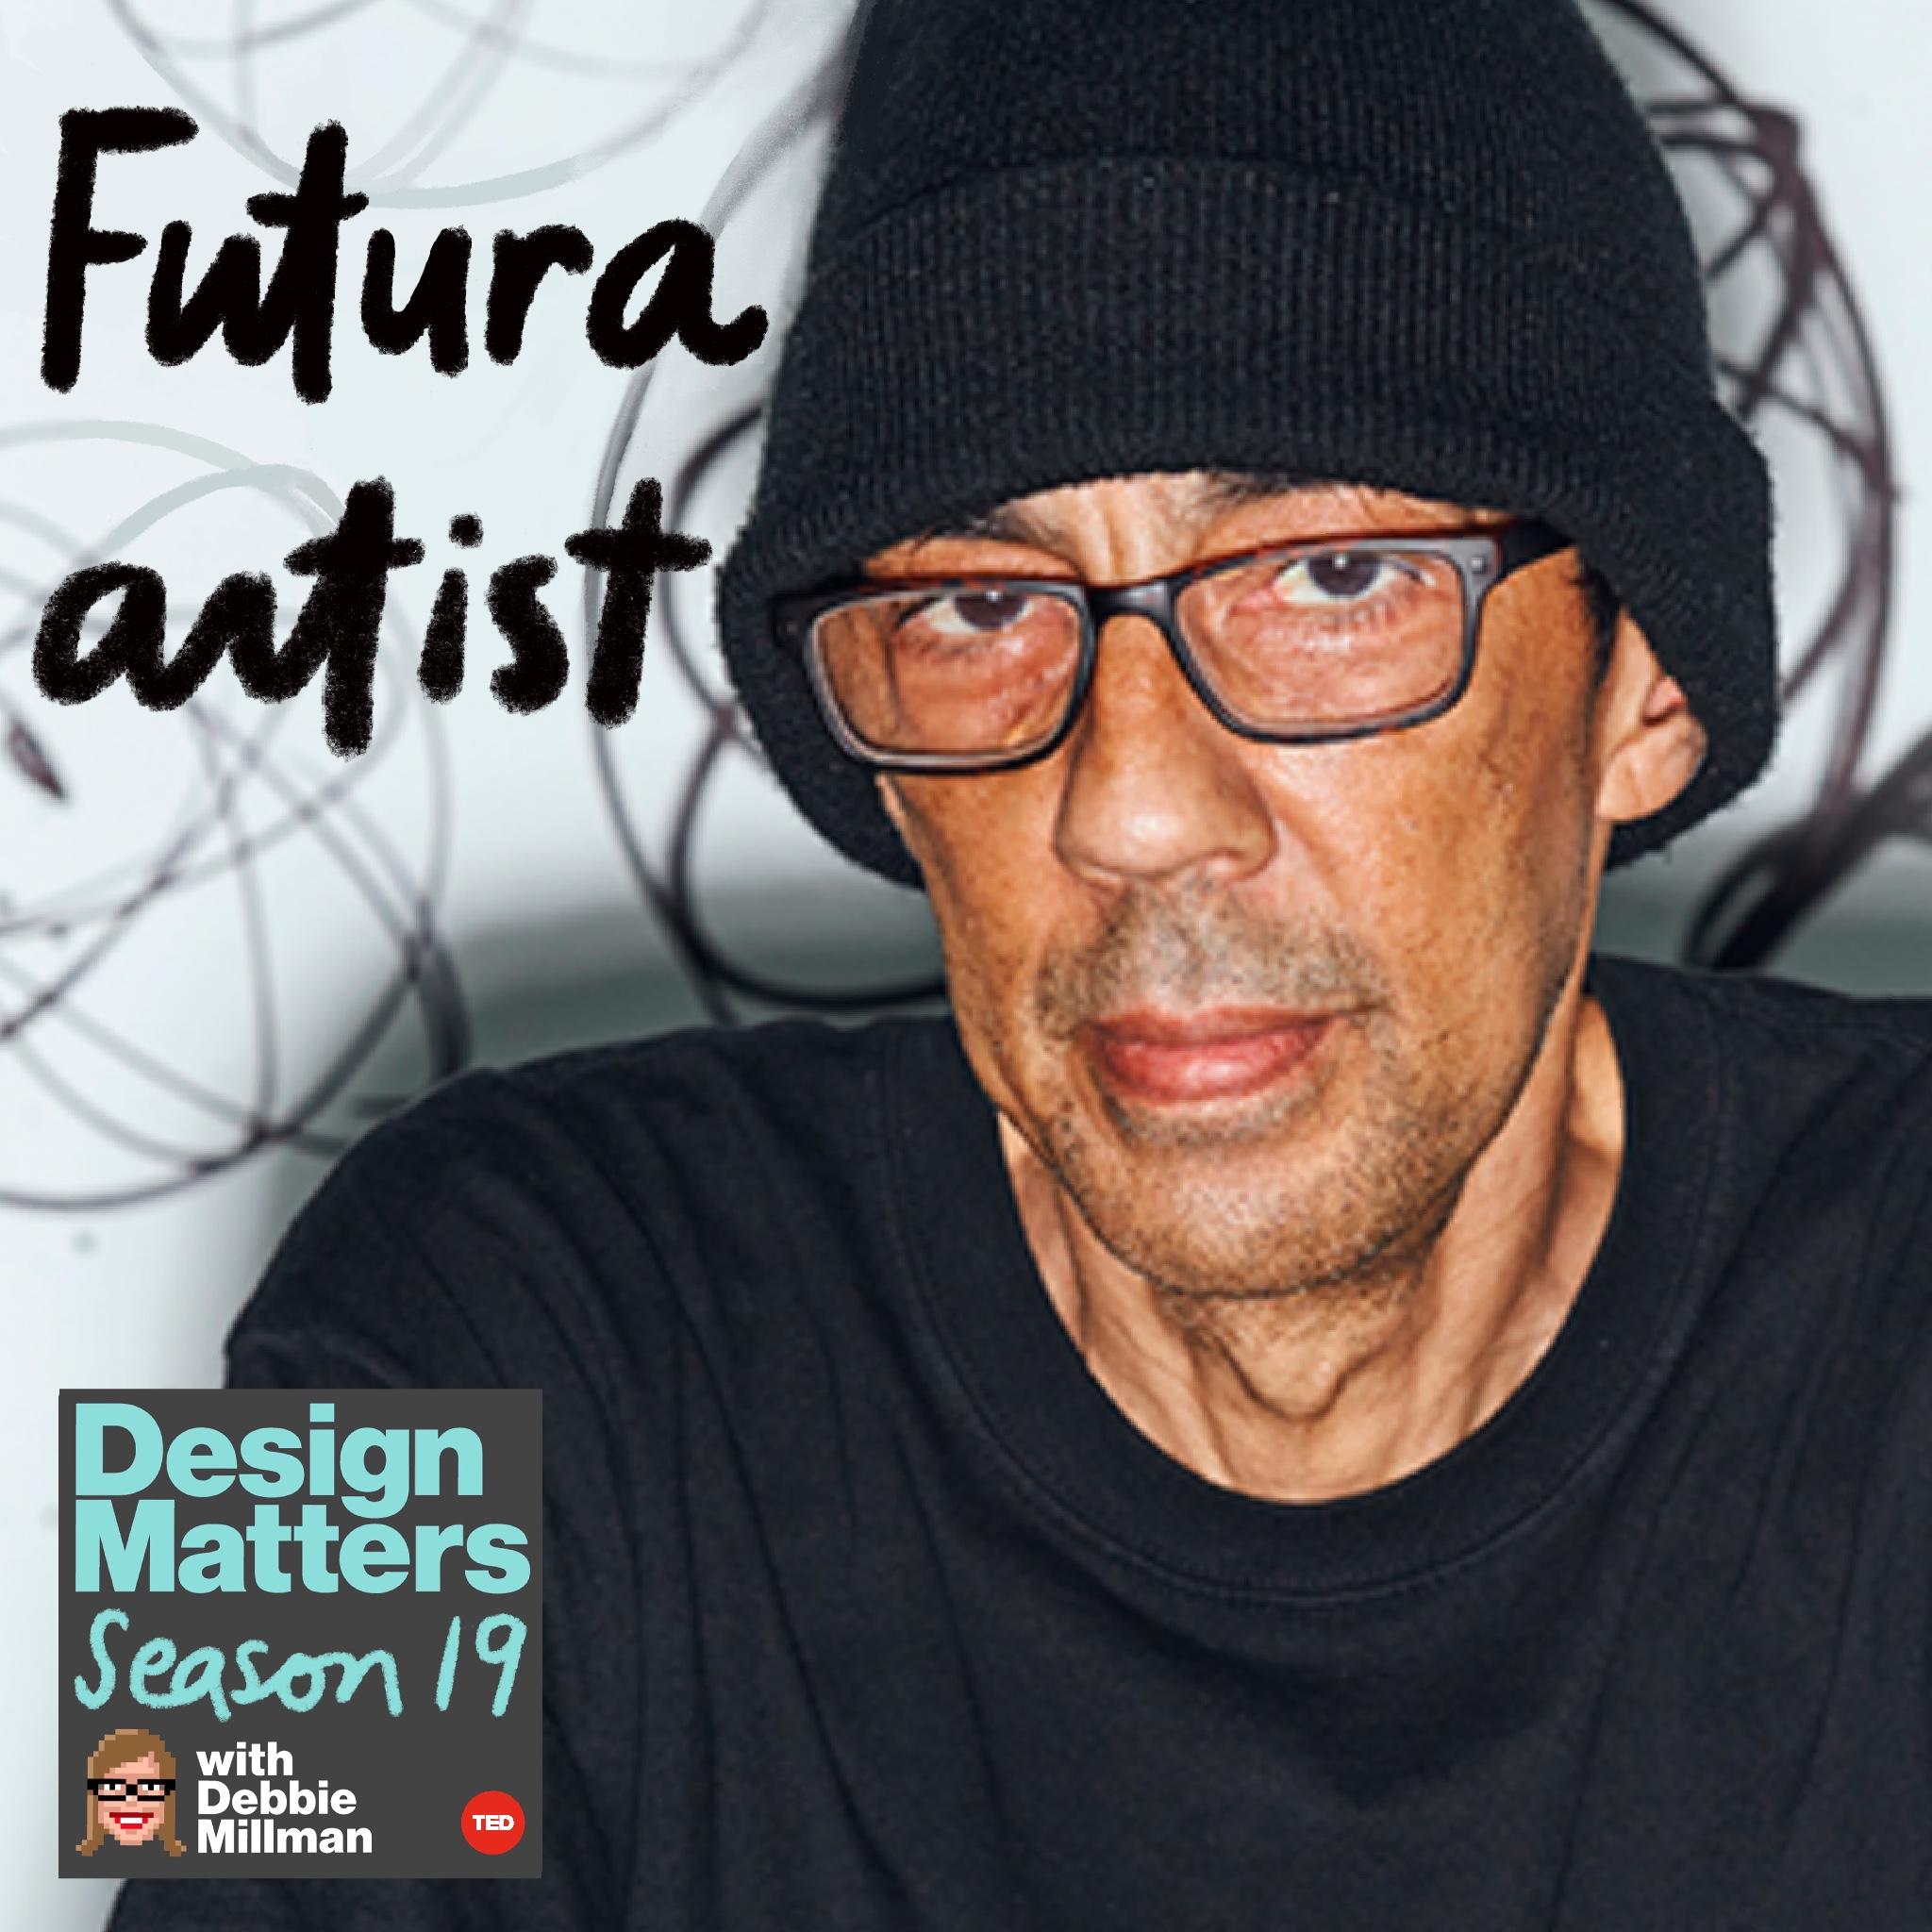 Thumbnail for "Best of Design Matters: Futura".